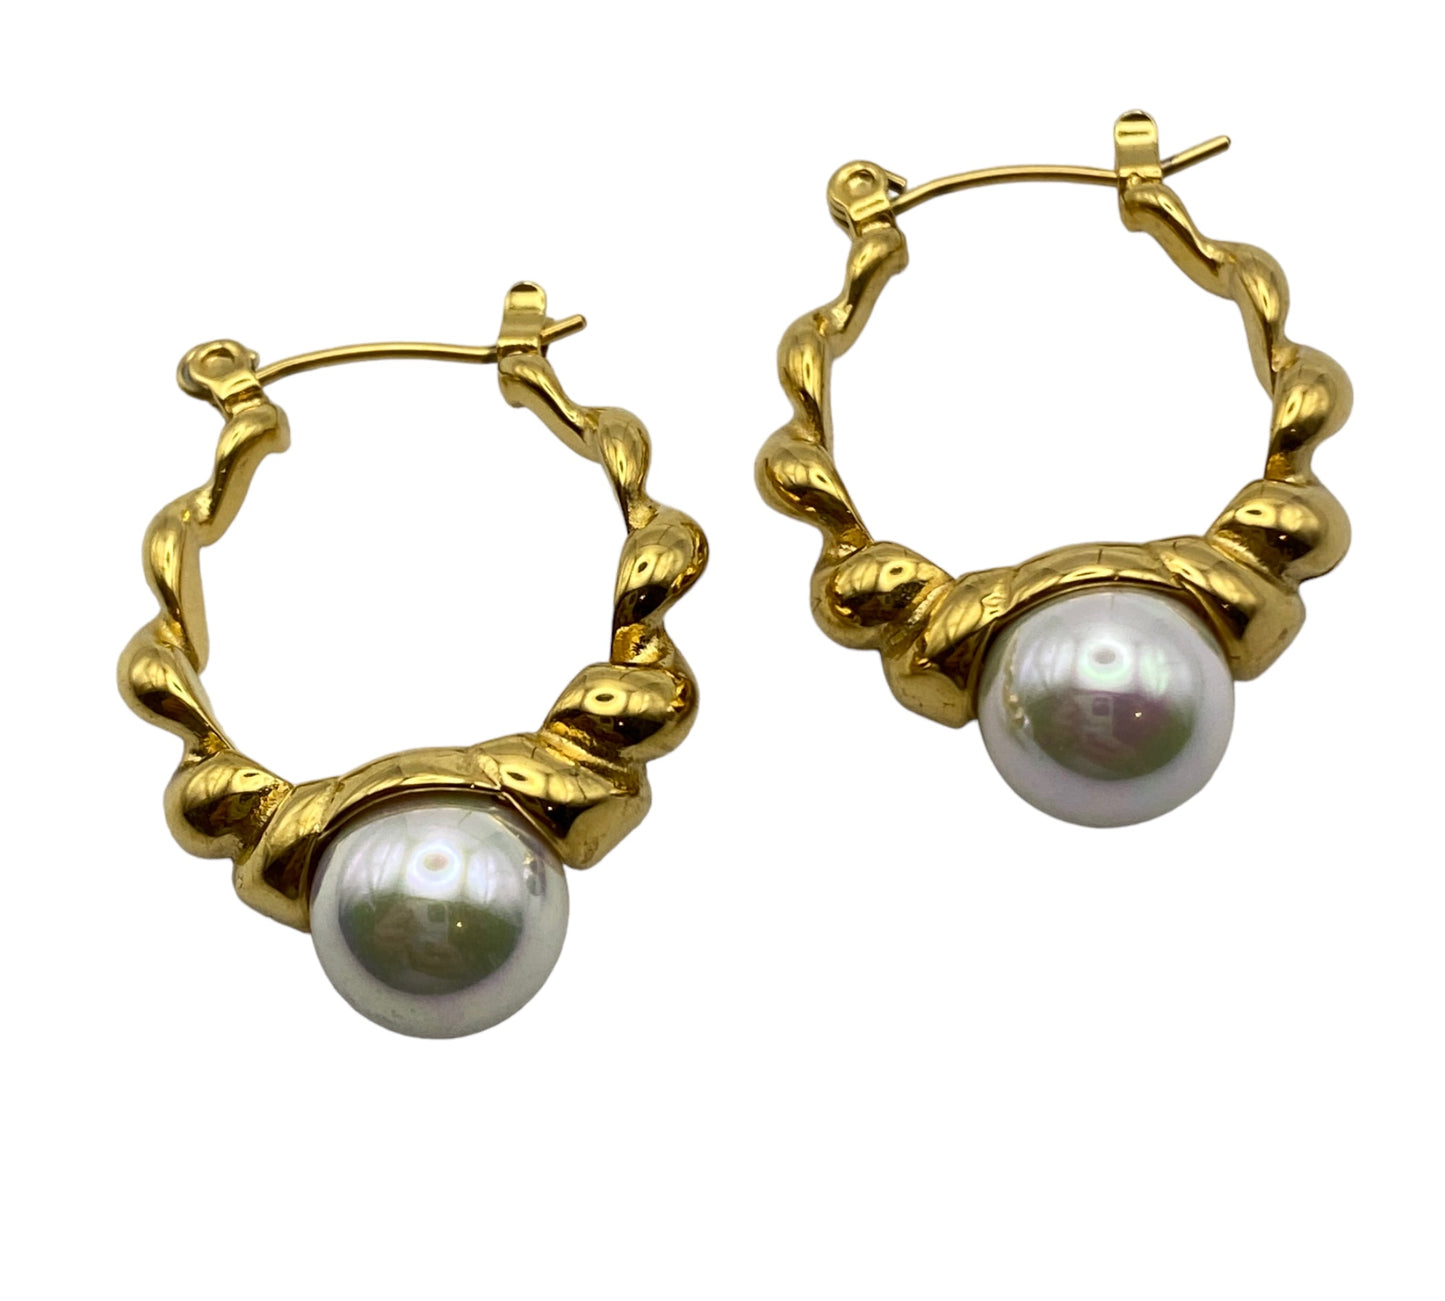 "OSHUN" gold plated twisted hoop earrings with a pearl bead attached